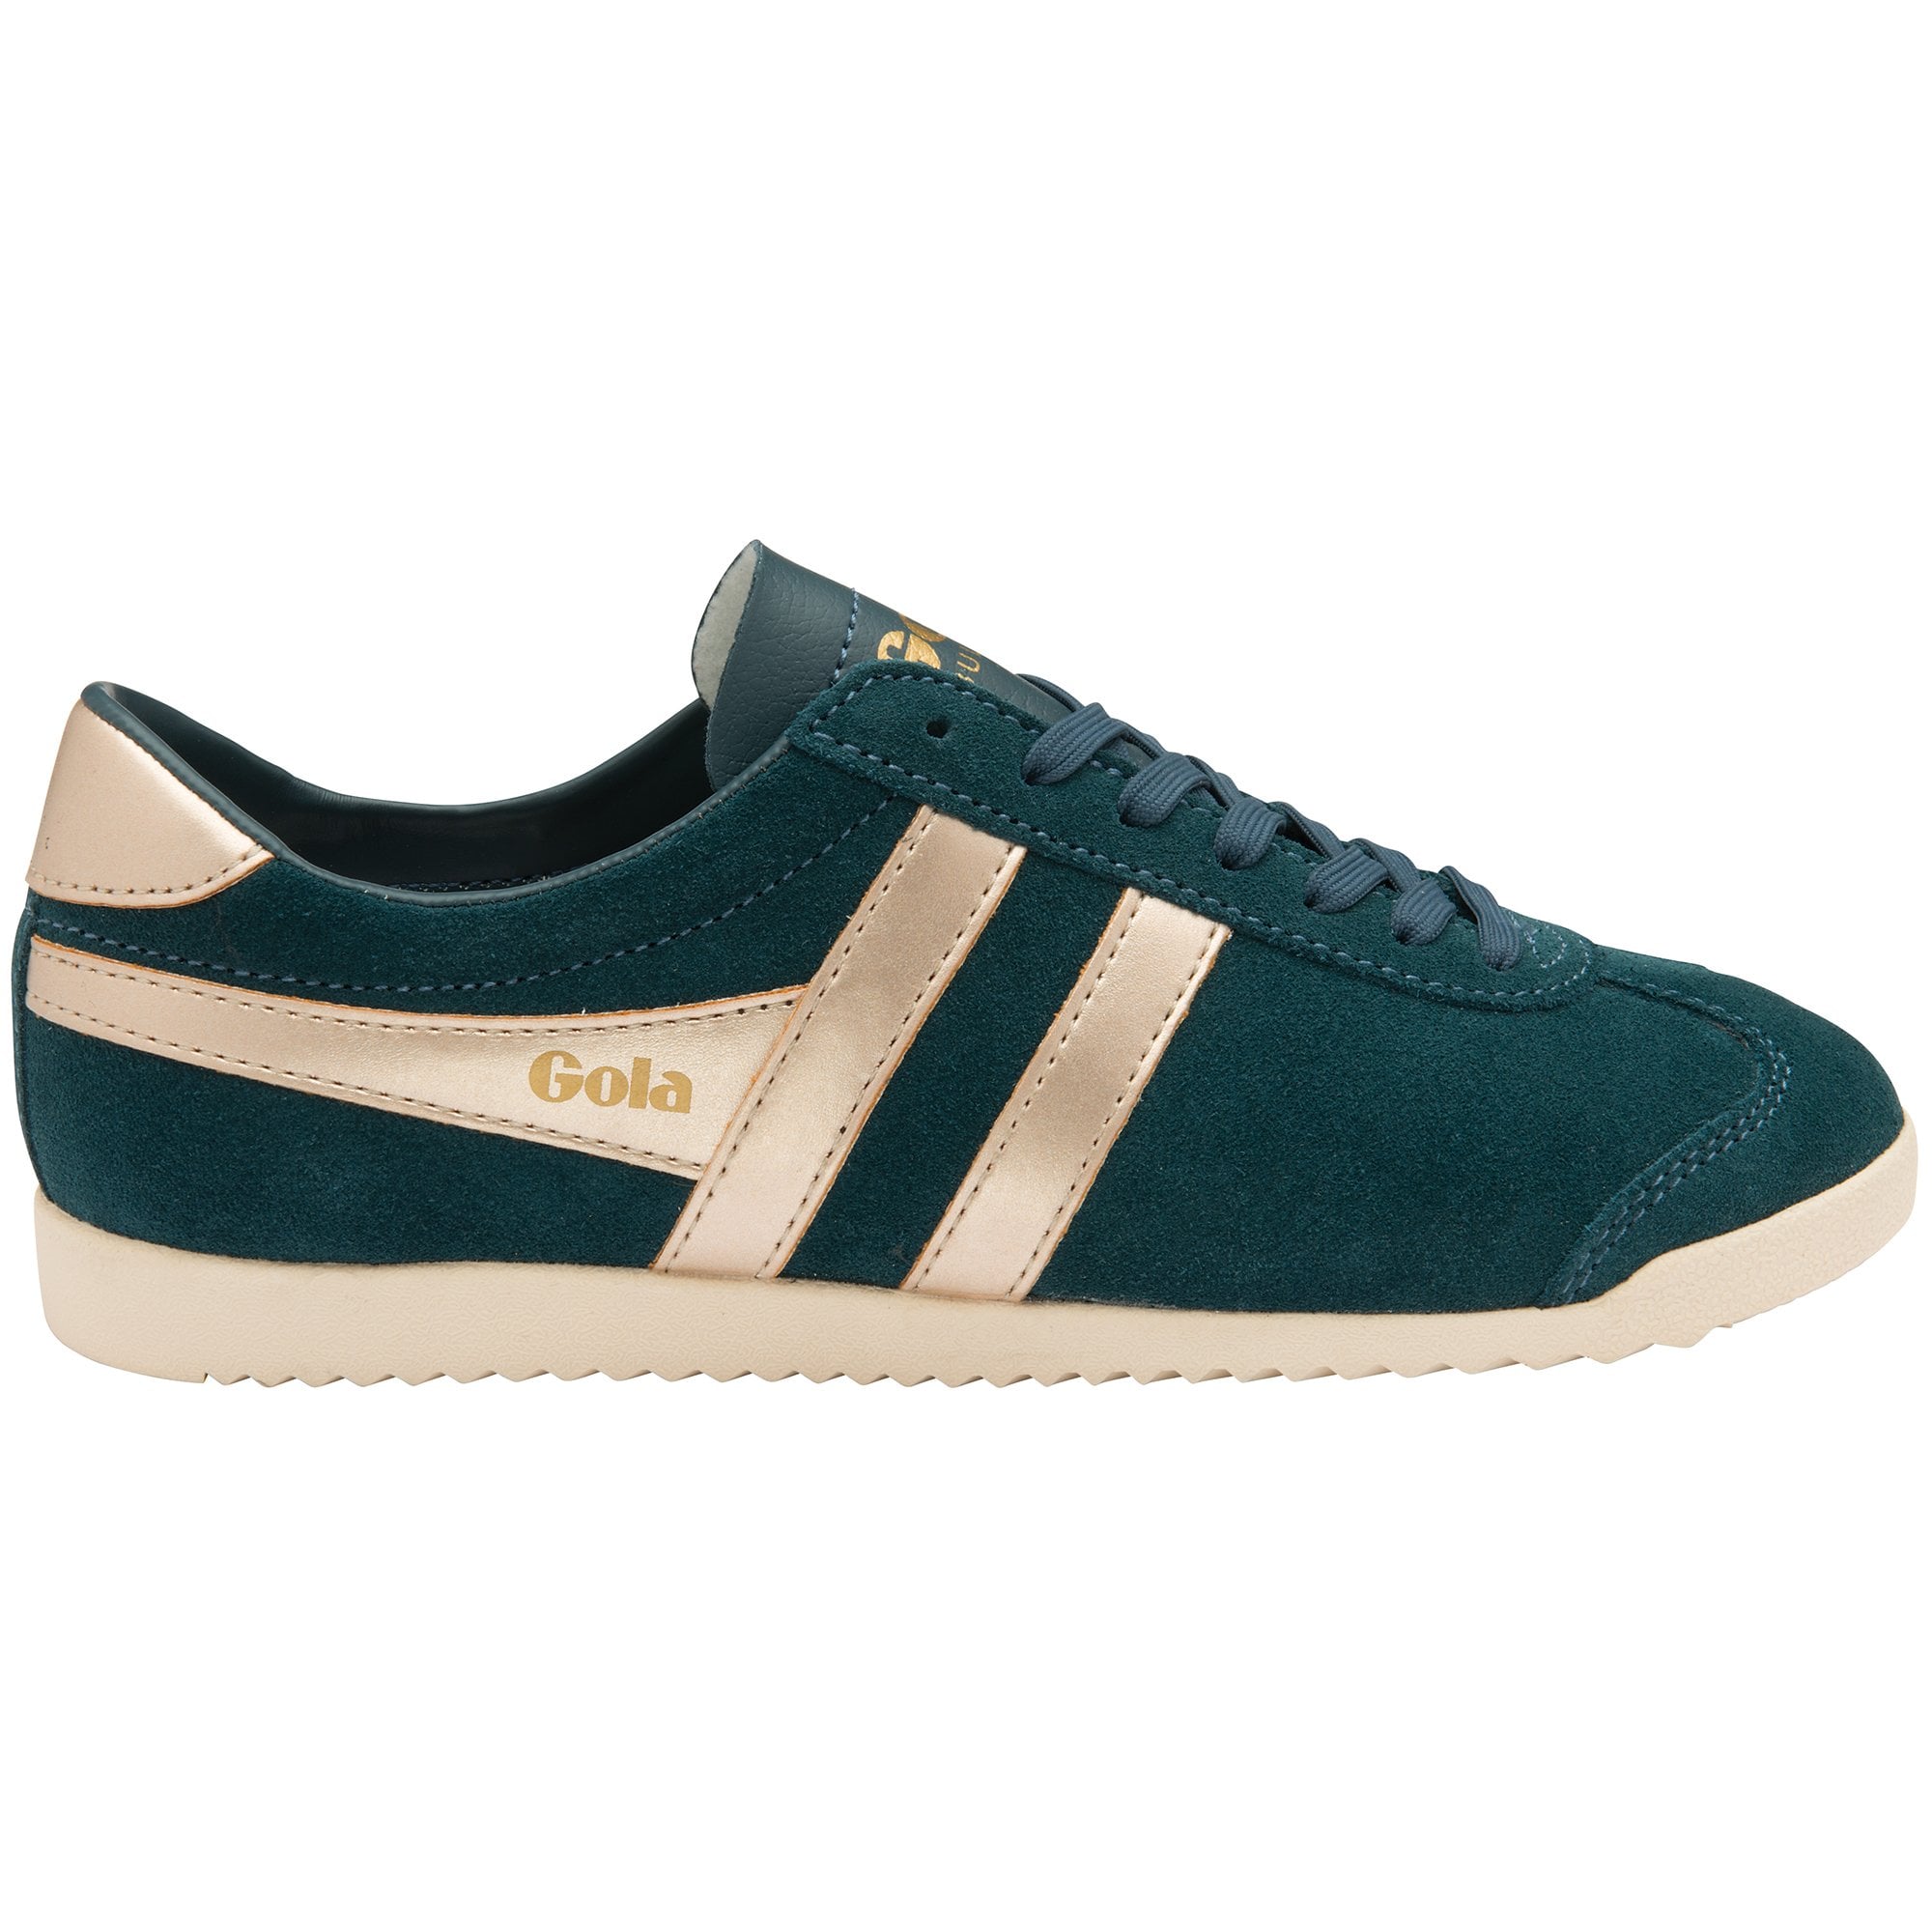 Gola Womens Bullet Pearl Classics Suede Trainers Shoes - Dark Teal 2951